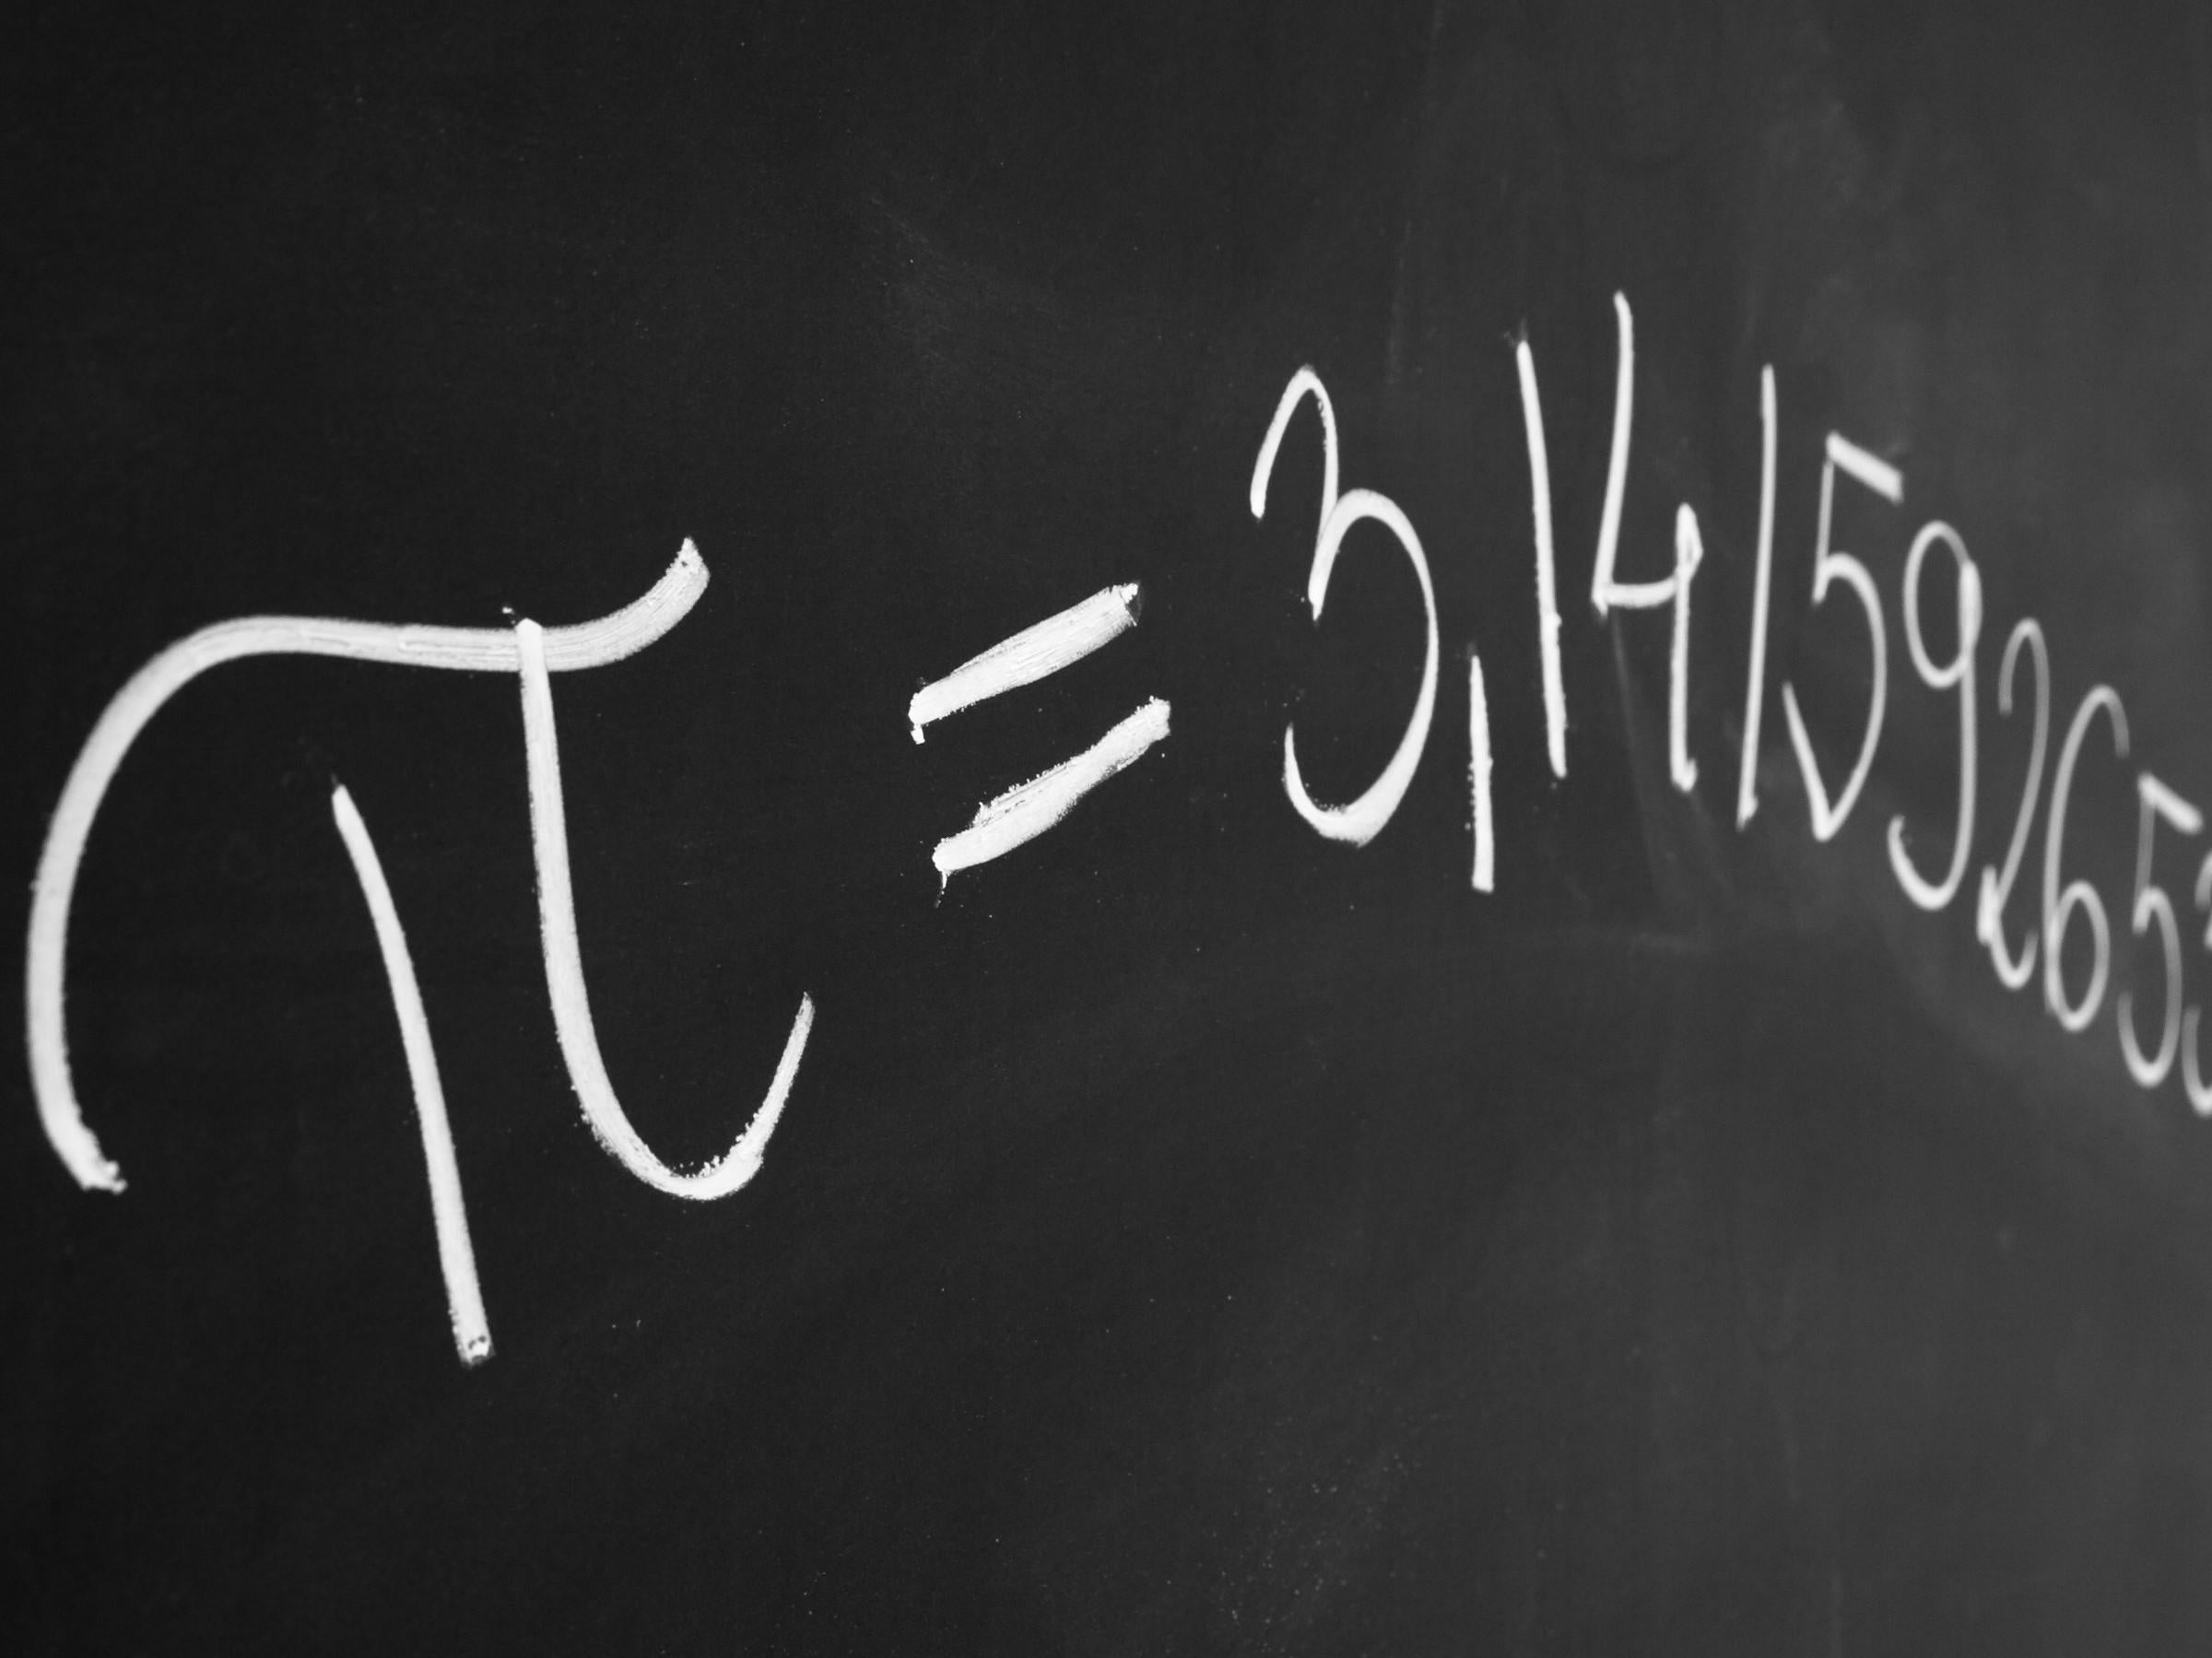 A new Guiness World Record for calculating pi was announced on Pi Day, 14 March